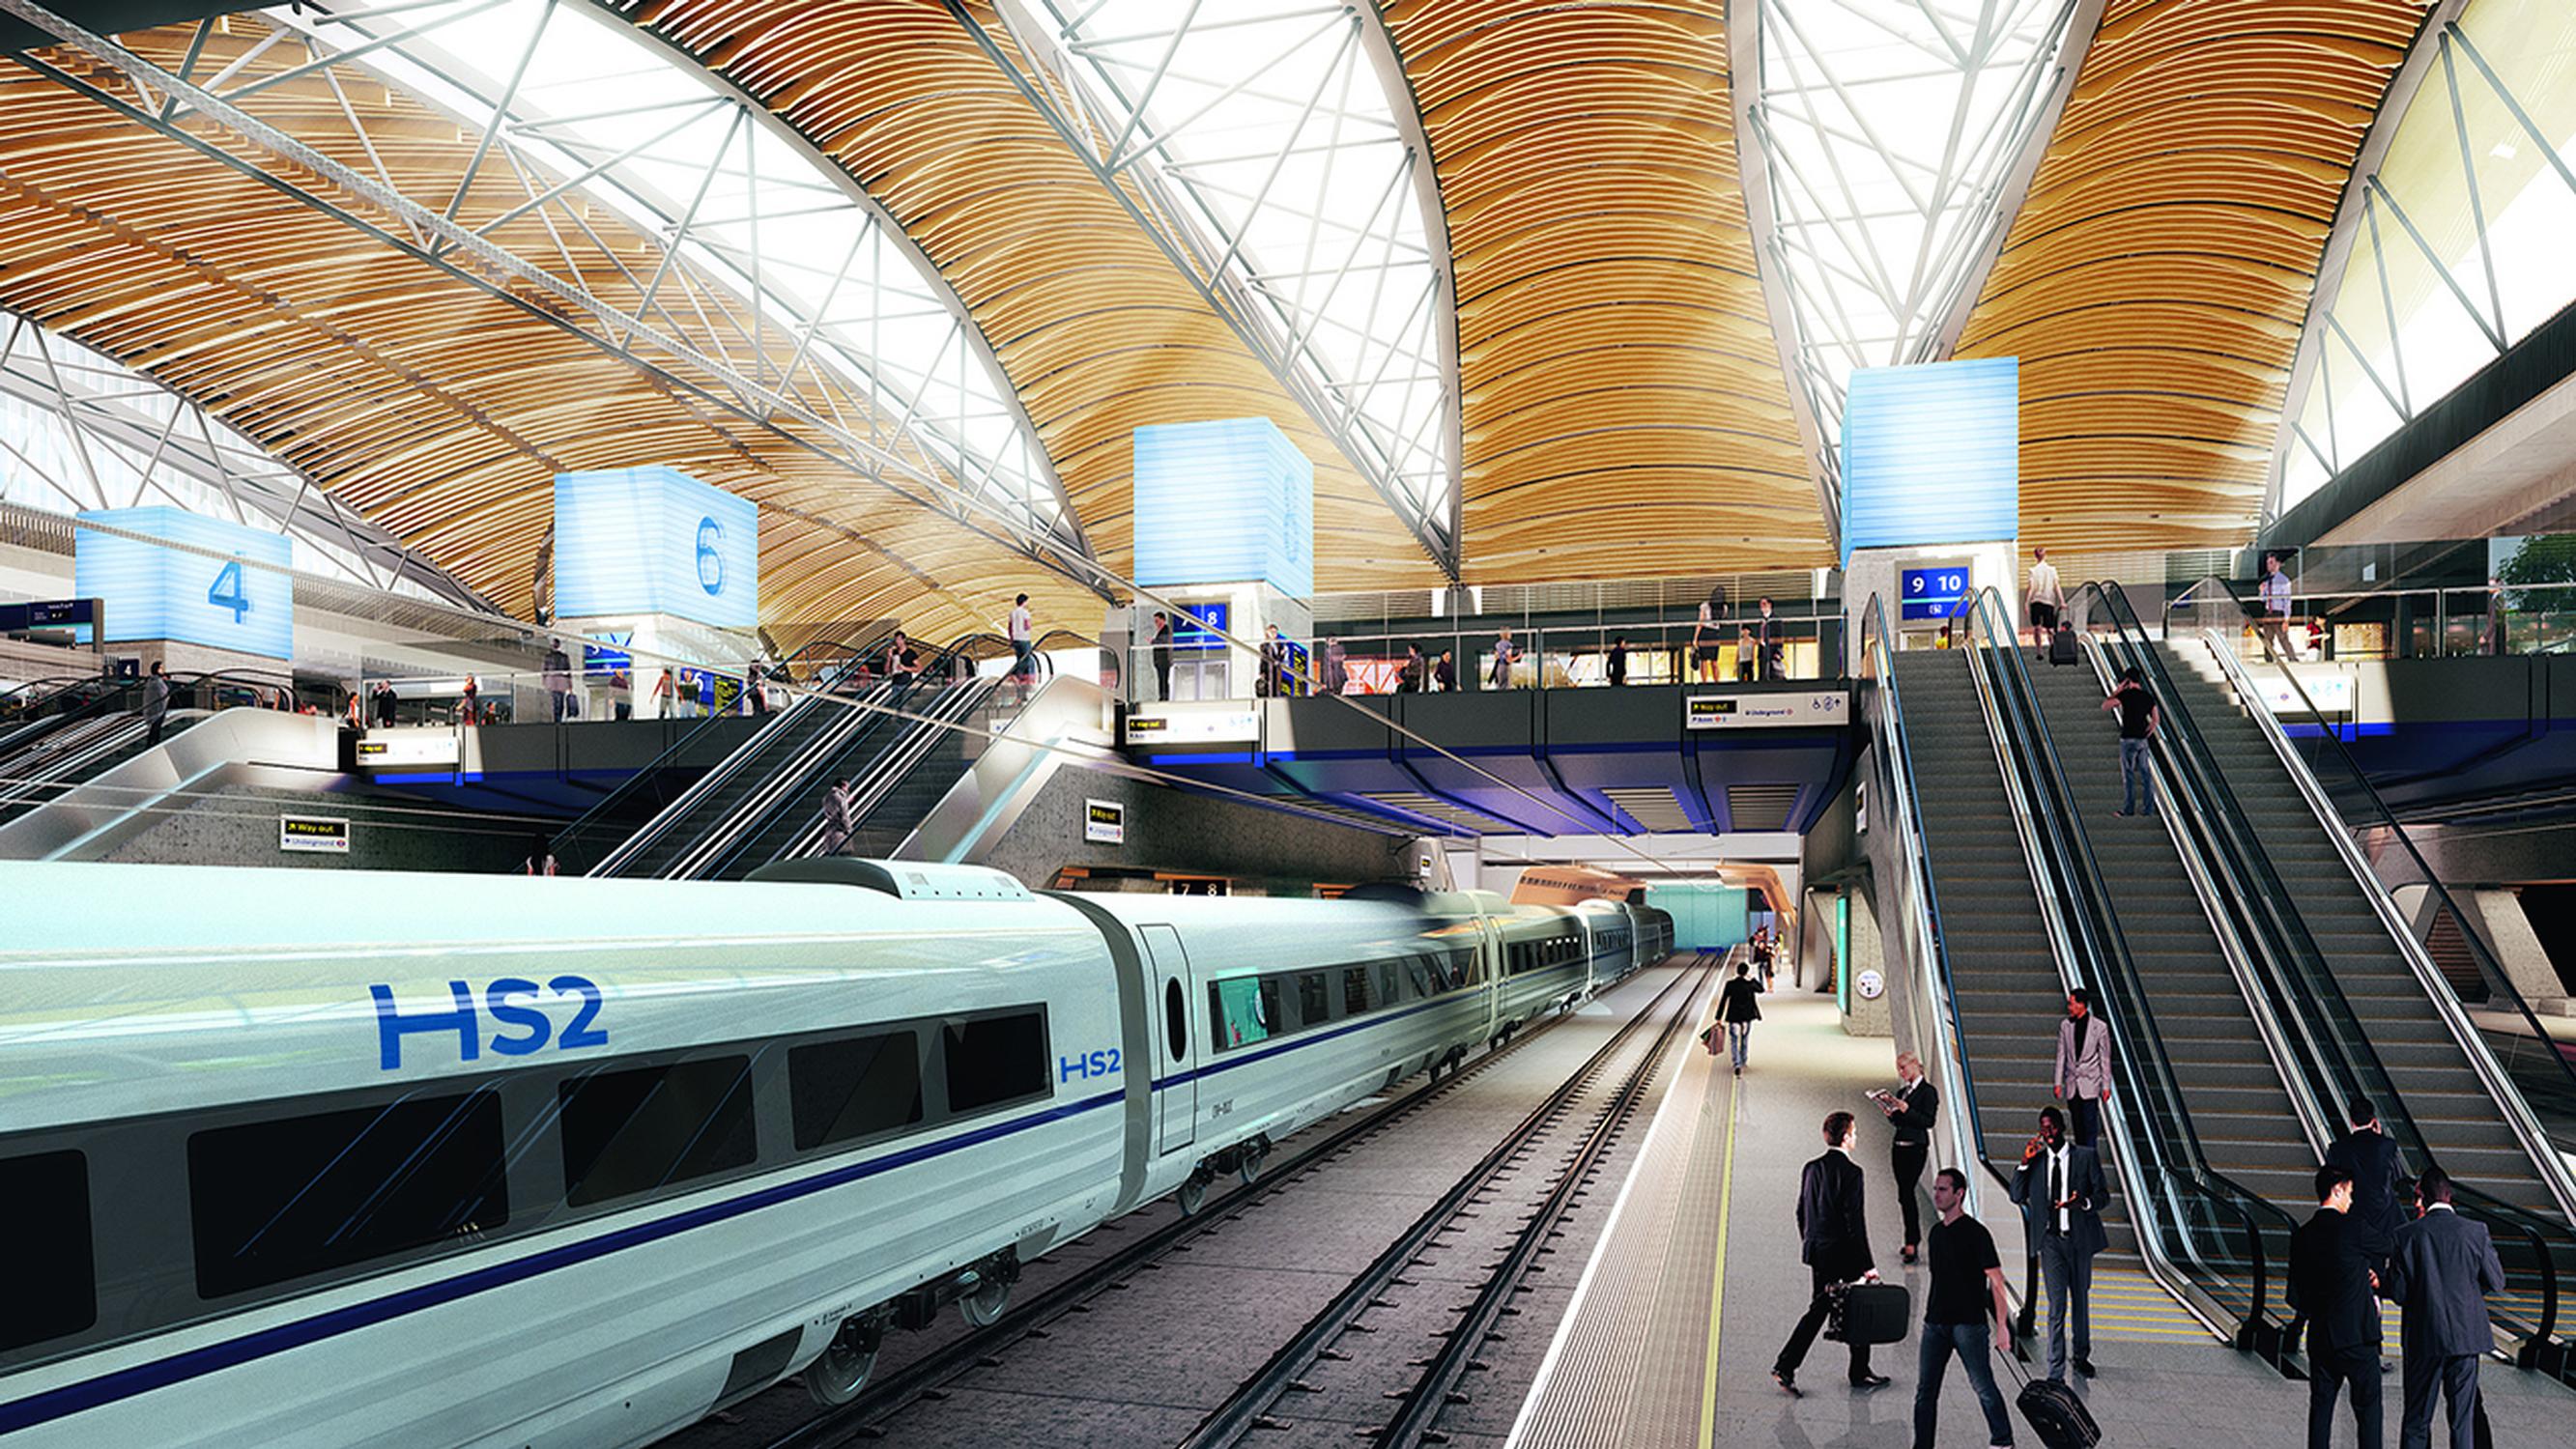 DfT yet to make decisions on HS2 plan for Euston, says PAC report